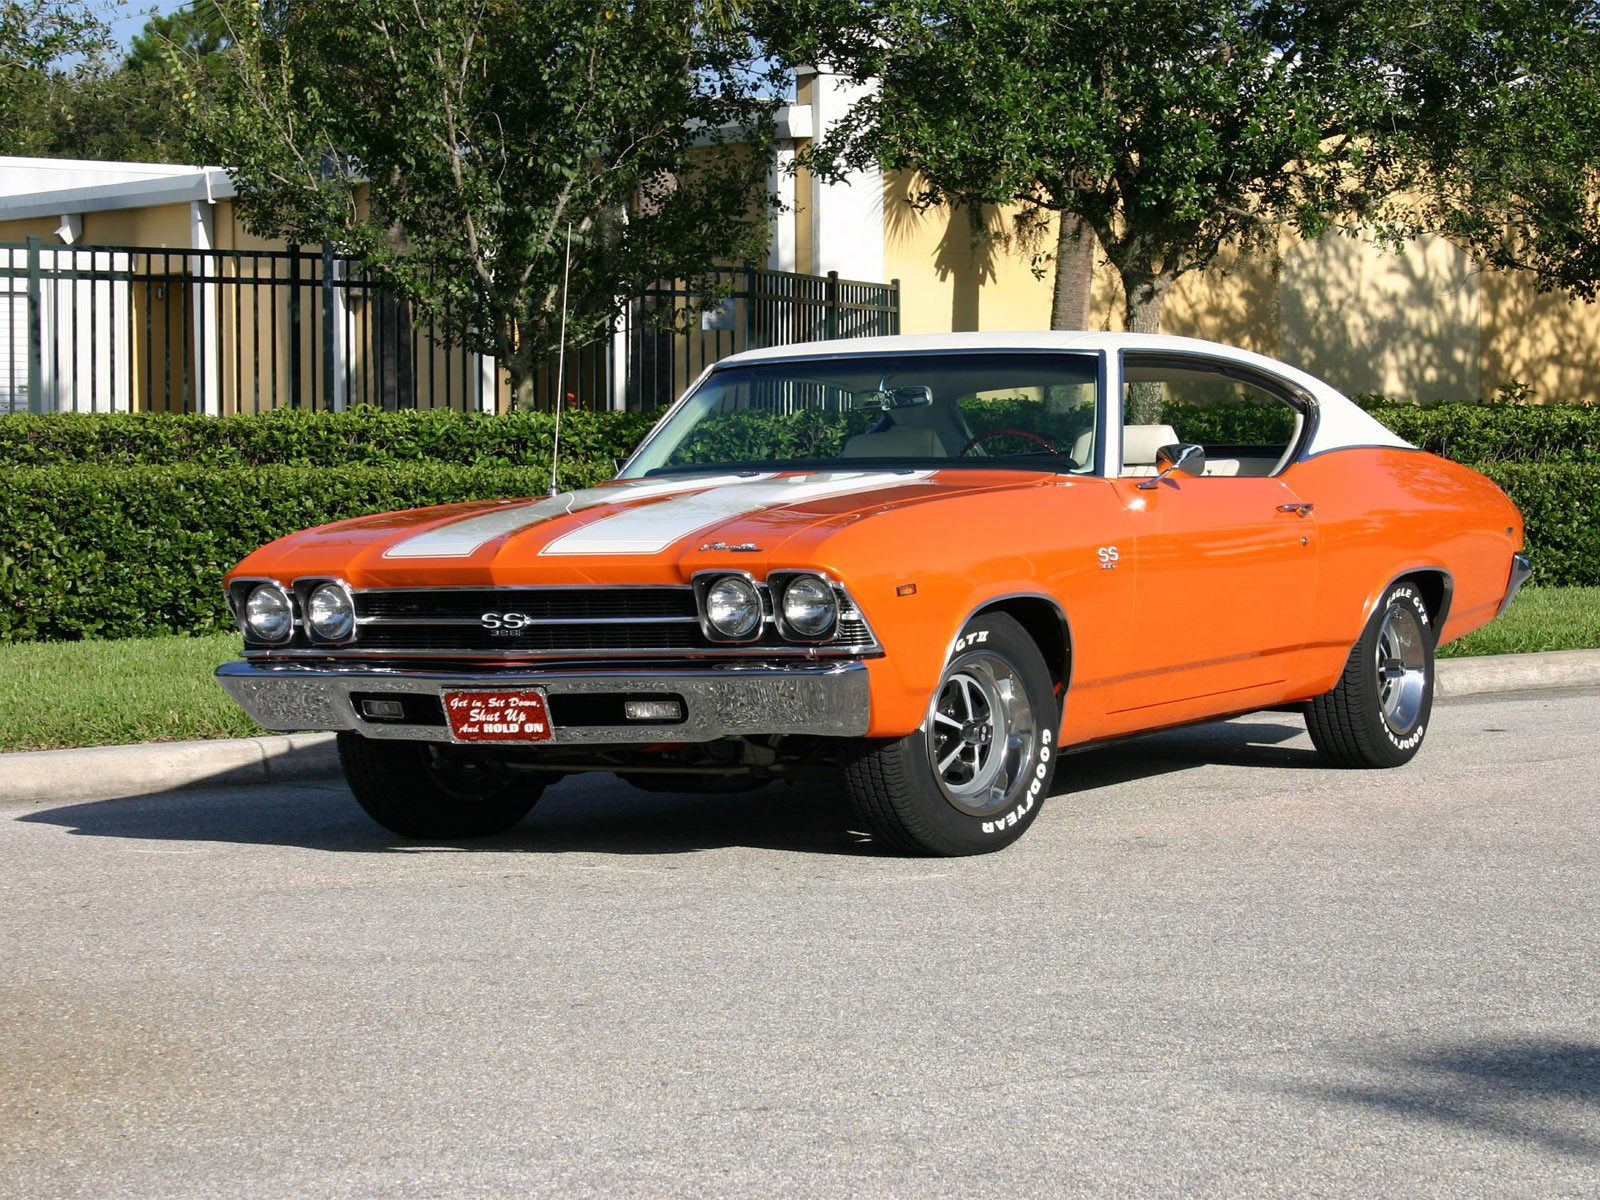 muscle car, vehicles, chevrolet chevelle ss, car, chevrolet chevelle, chevrolet, orange car